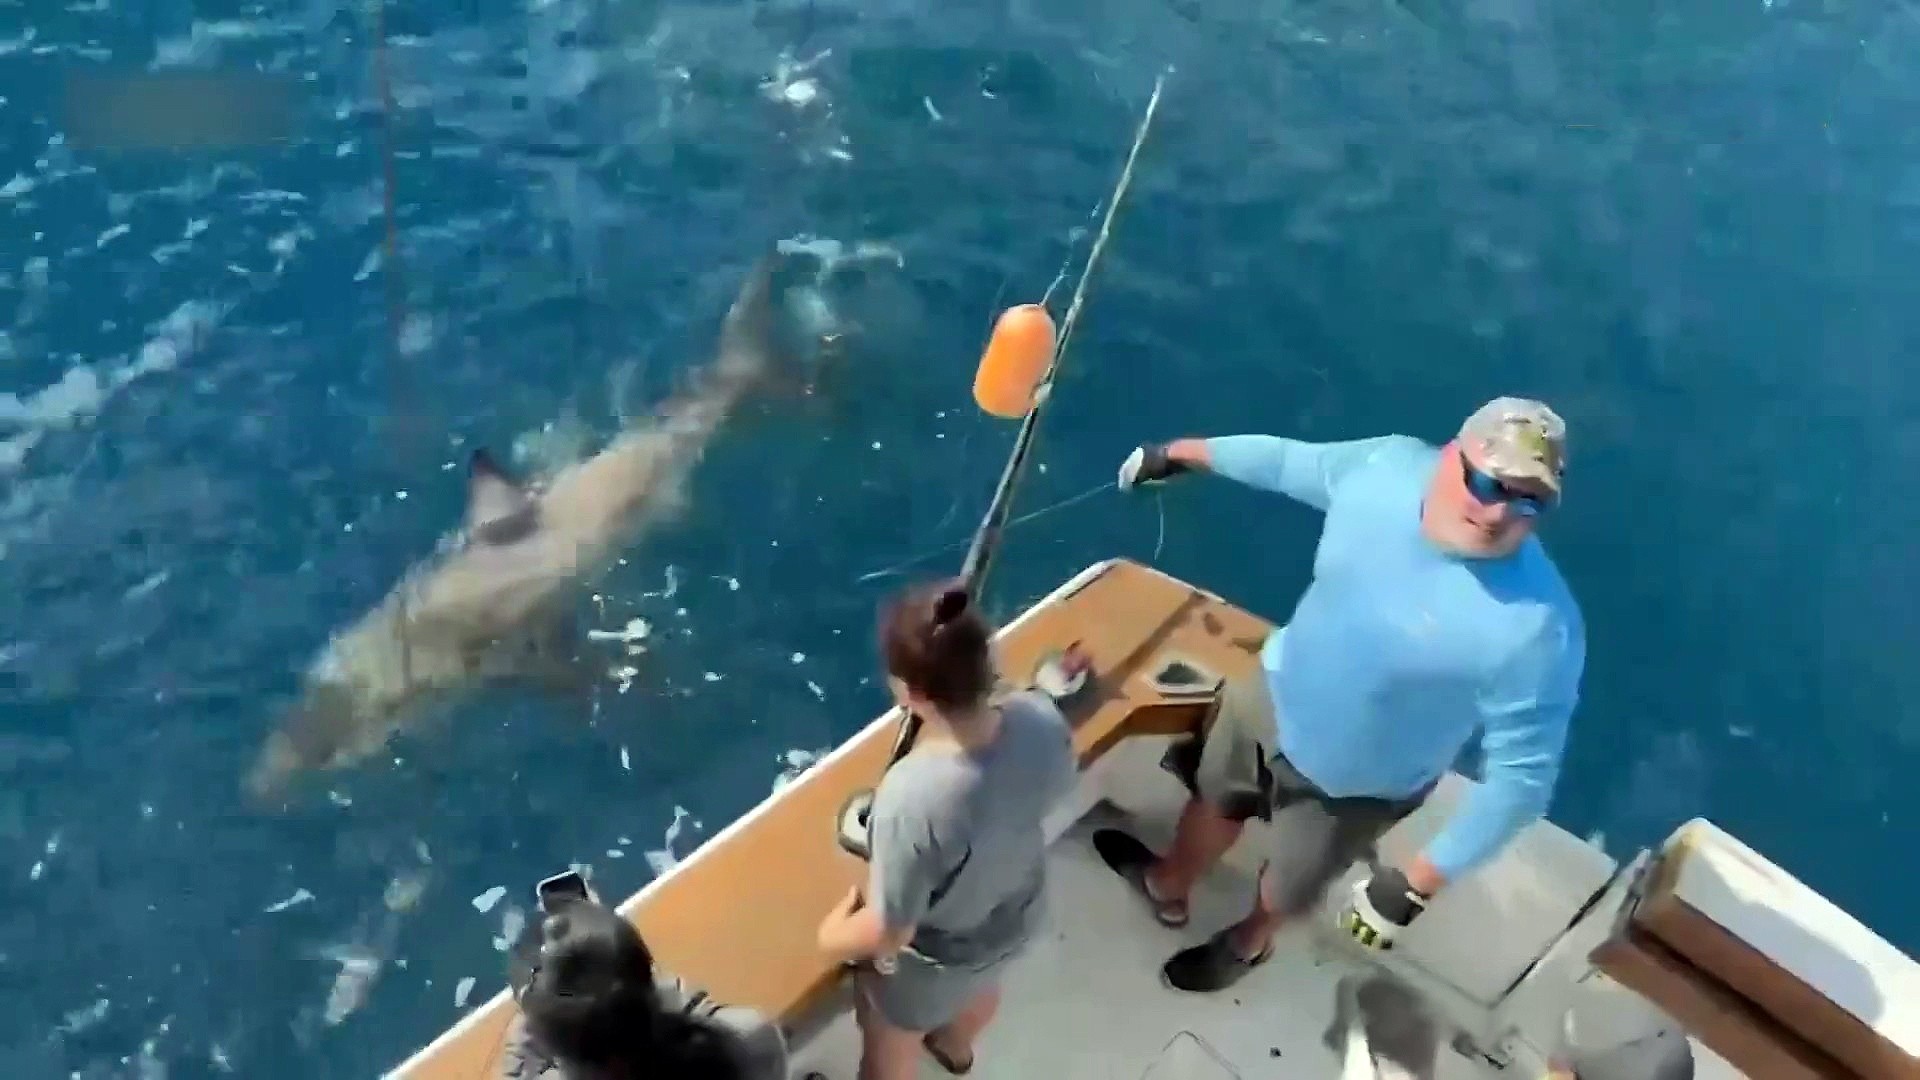 12-year-old reels in great white shark in South Florida